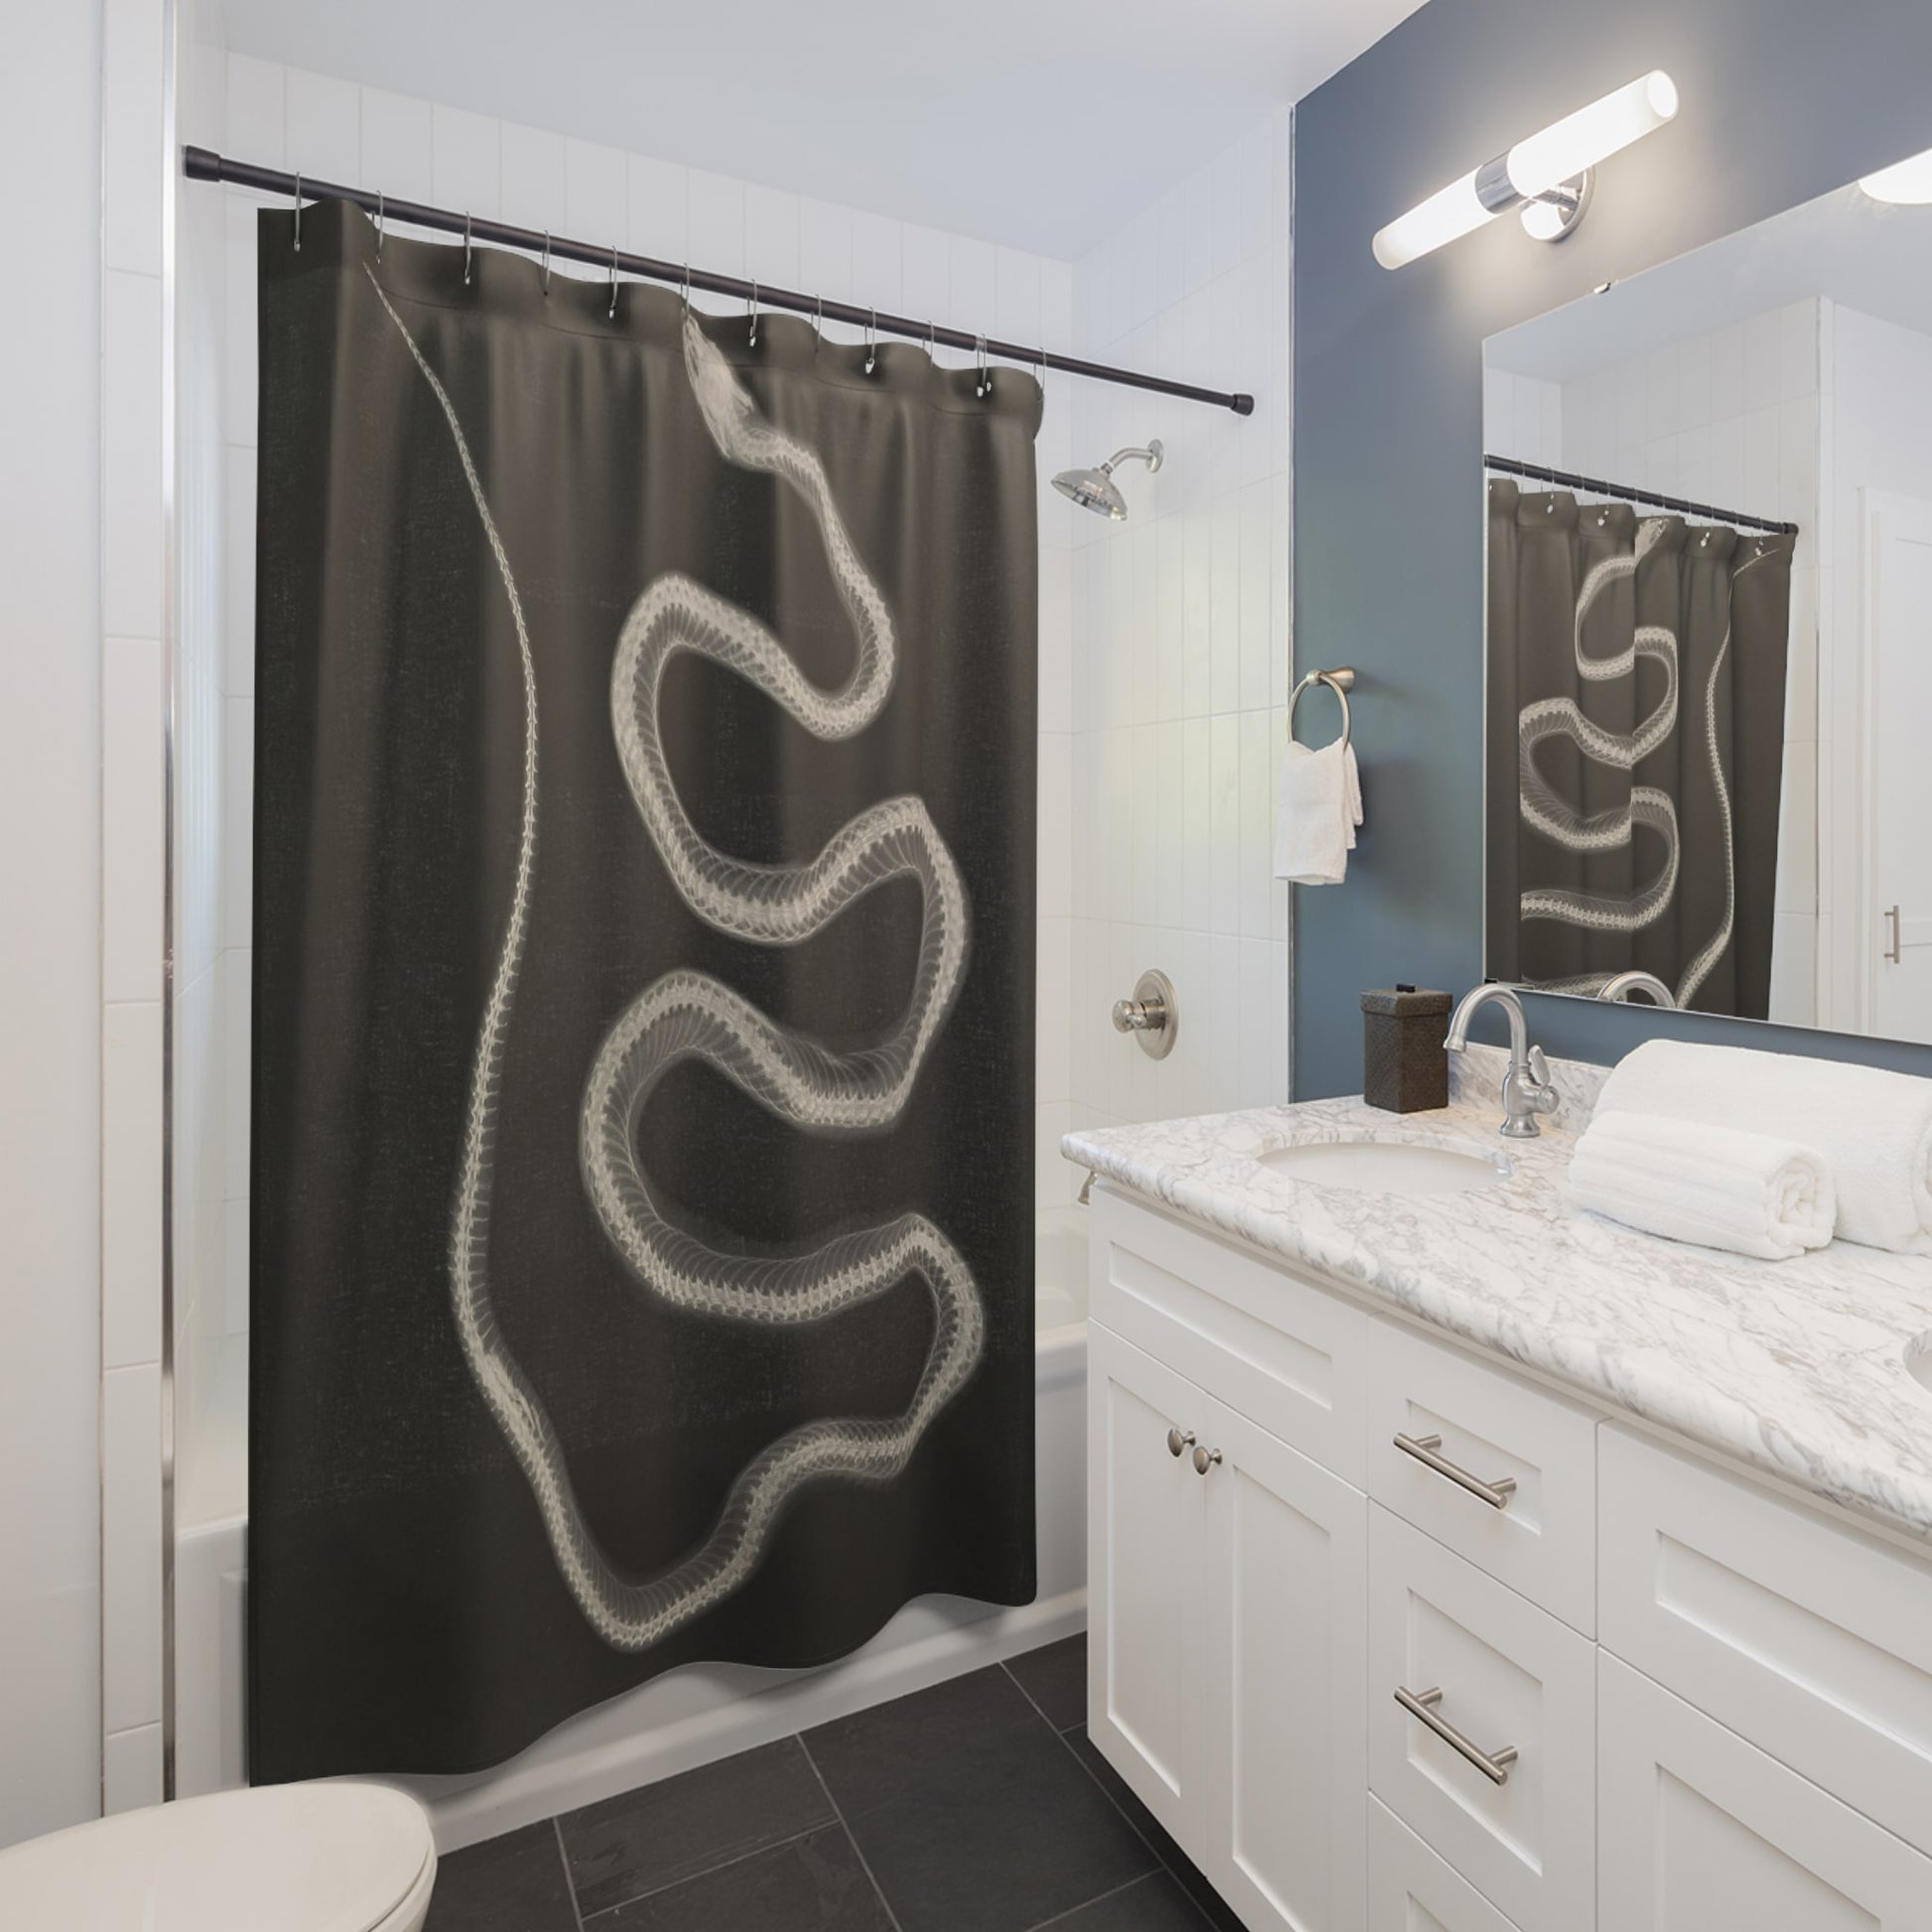 Black and White Snake Shower Curtain Best Bathroom Decorating Ideas for Science Decor